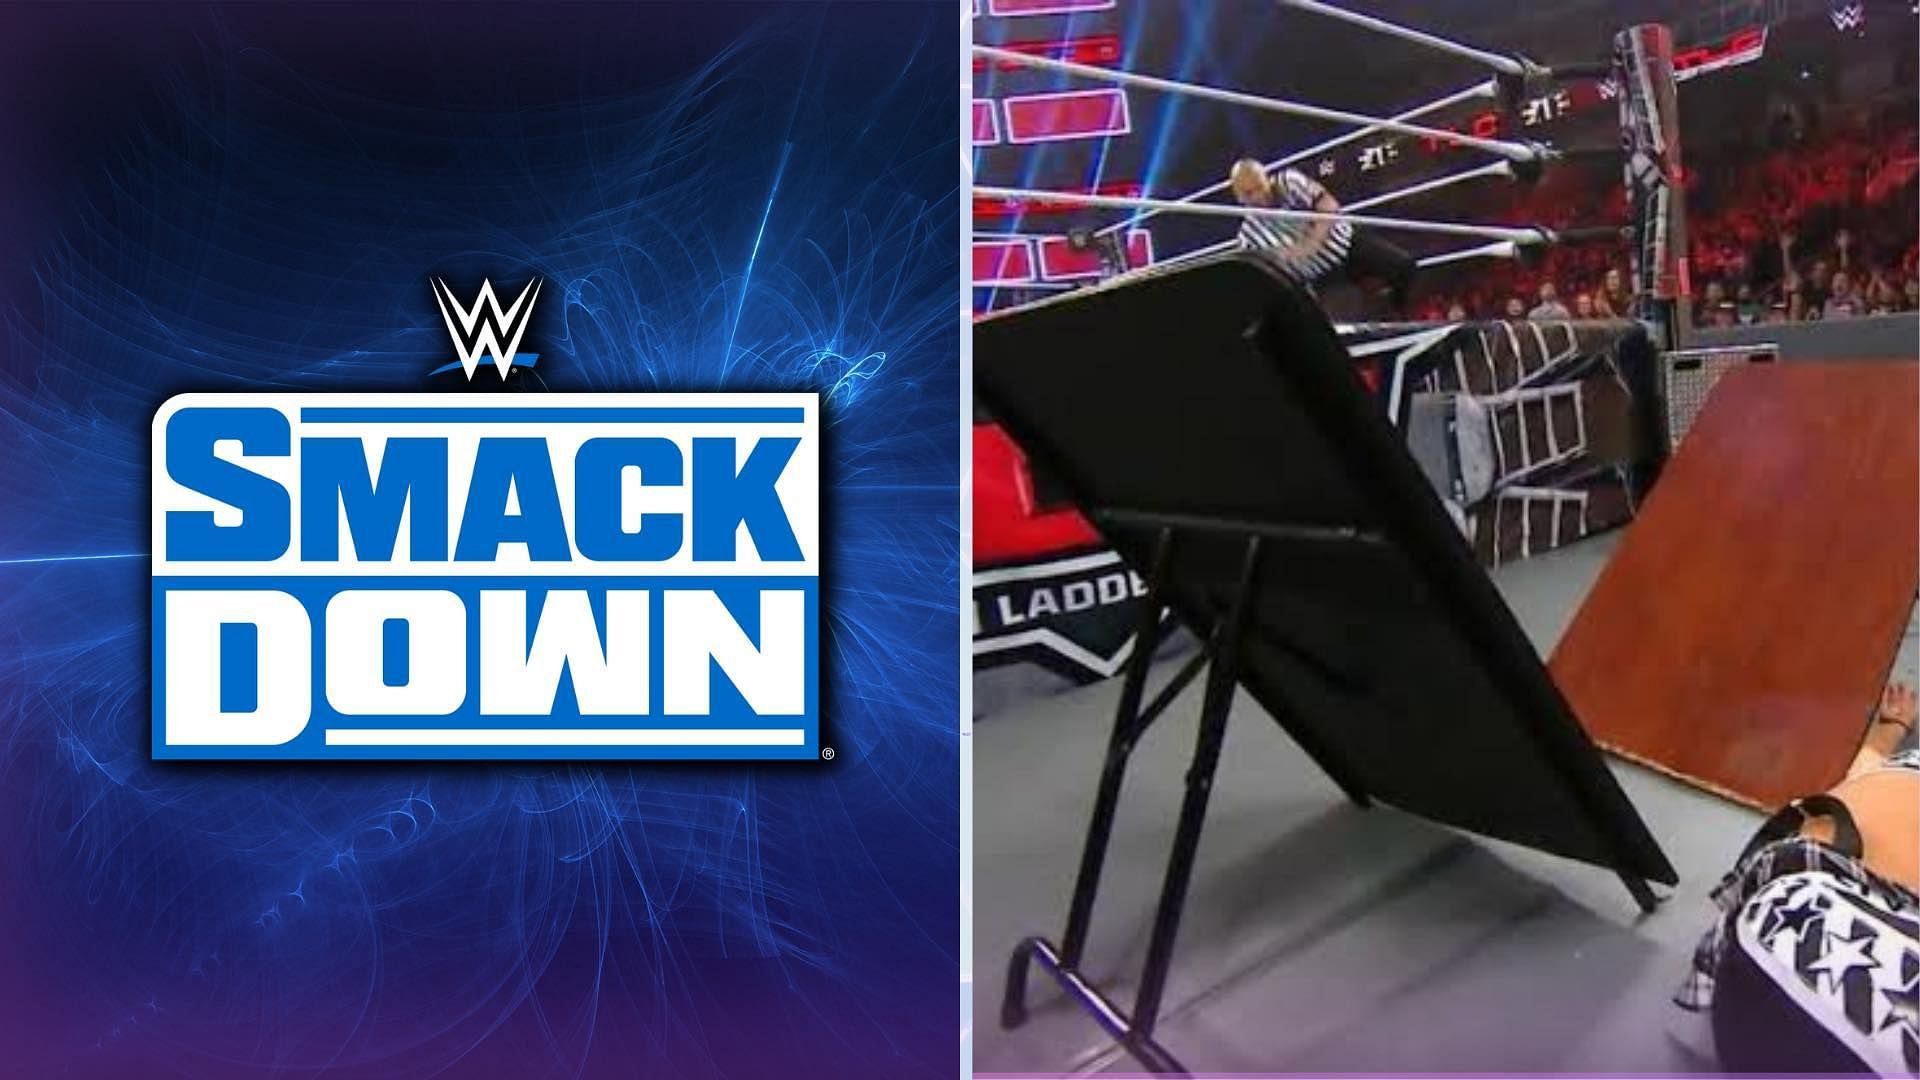 Tag team faced top champions in a dark match after WWE SmackDown went off-air.